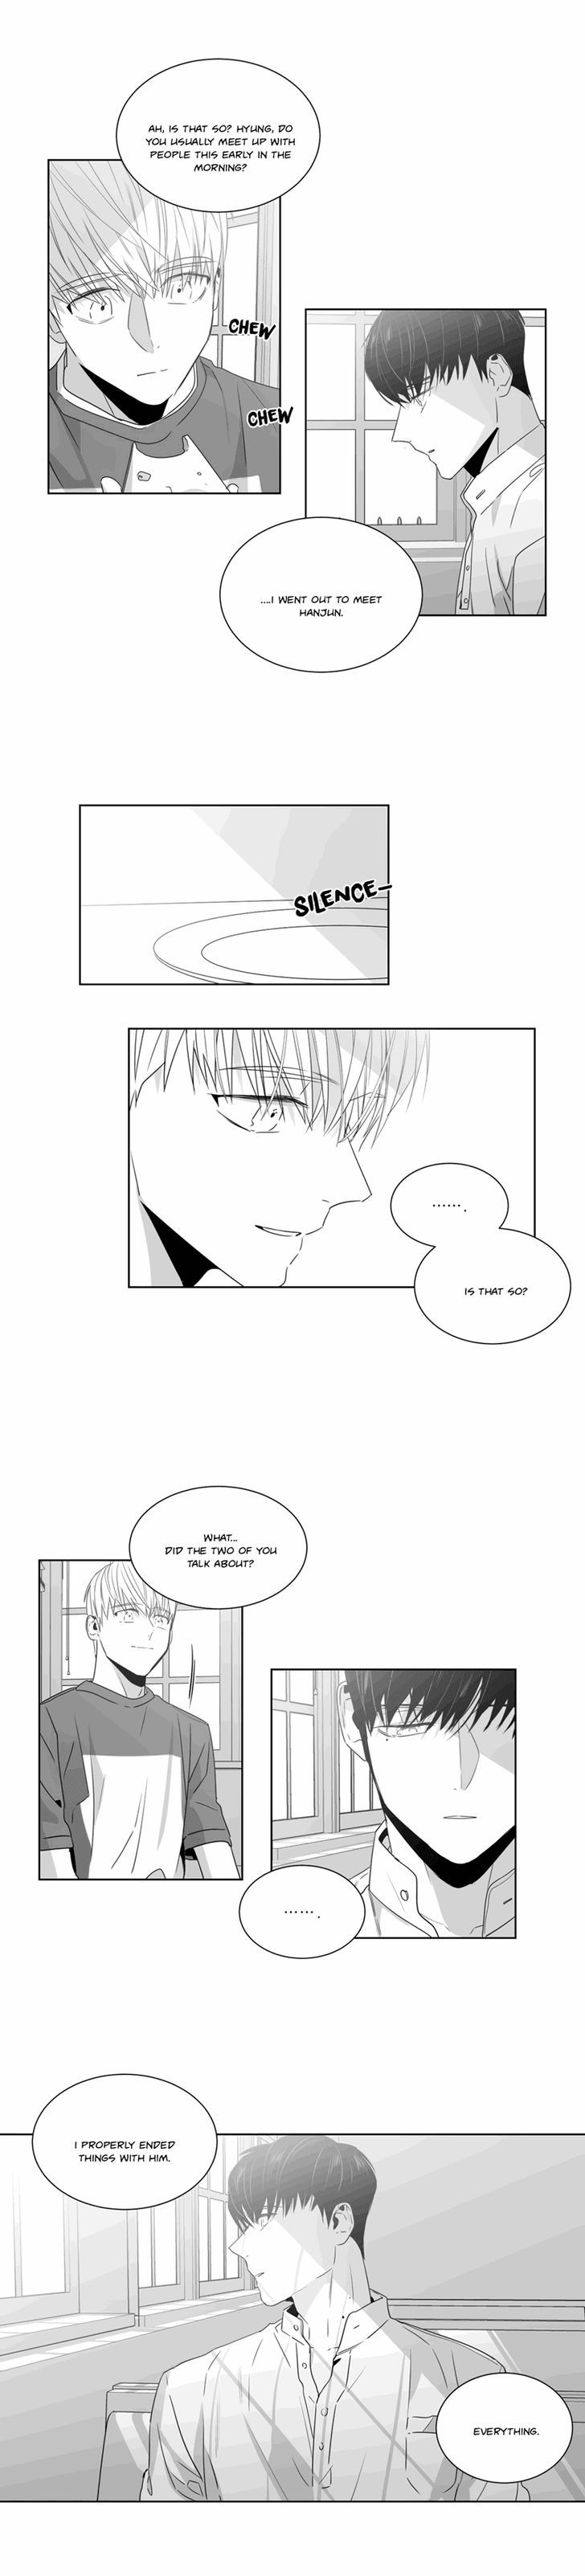 Lover Boy (Lezhin) Chapter 038 page 9